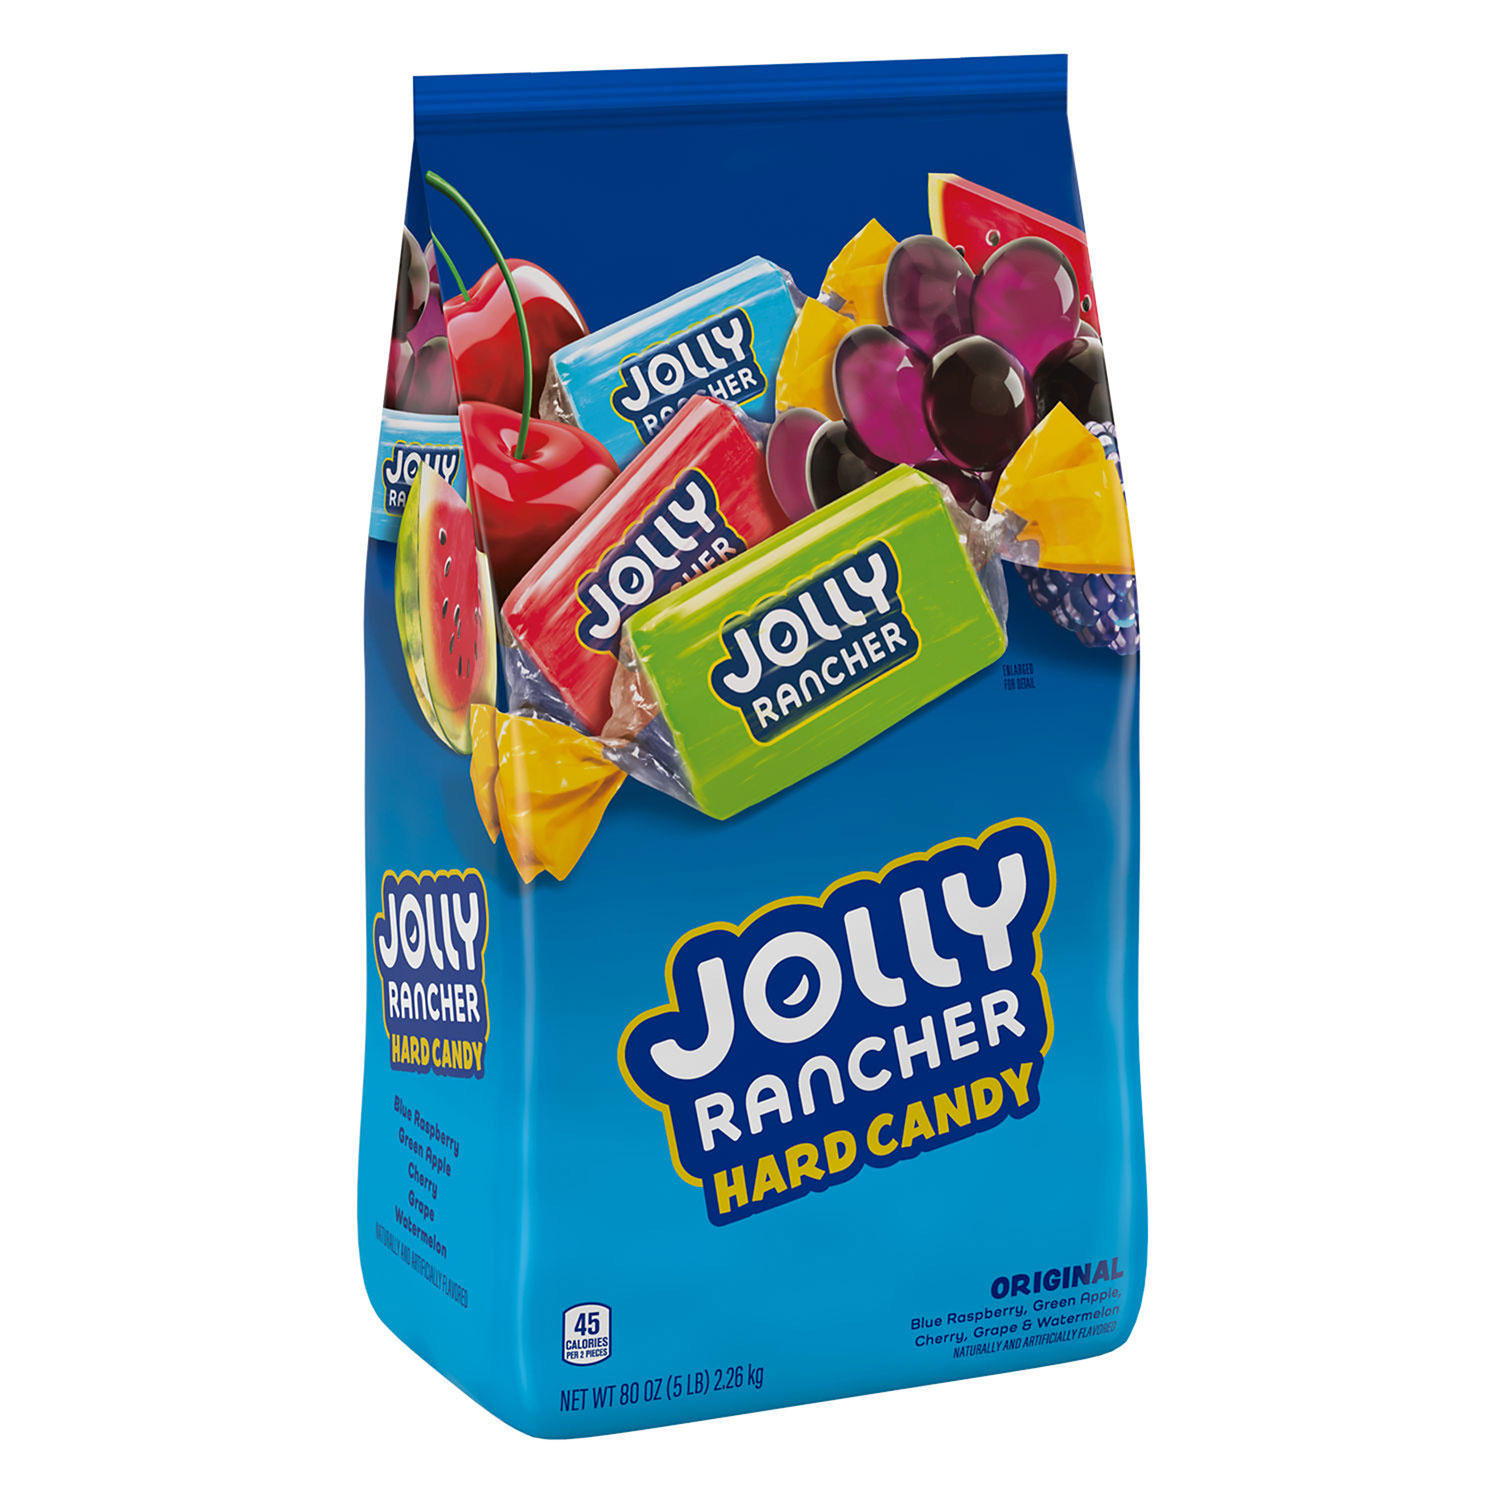 JOLLY RANCHER Assorted Fruit Flavored Hard Candy, 5 lbs.